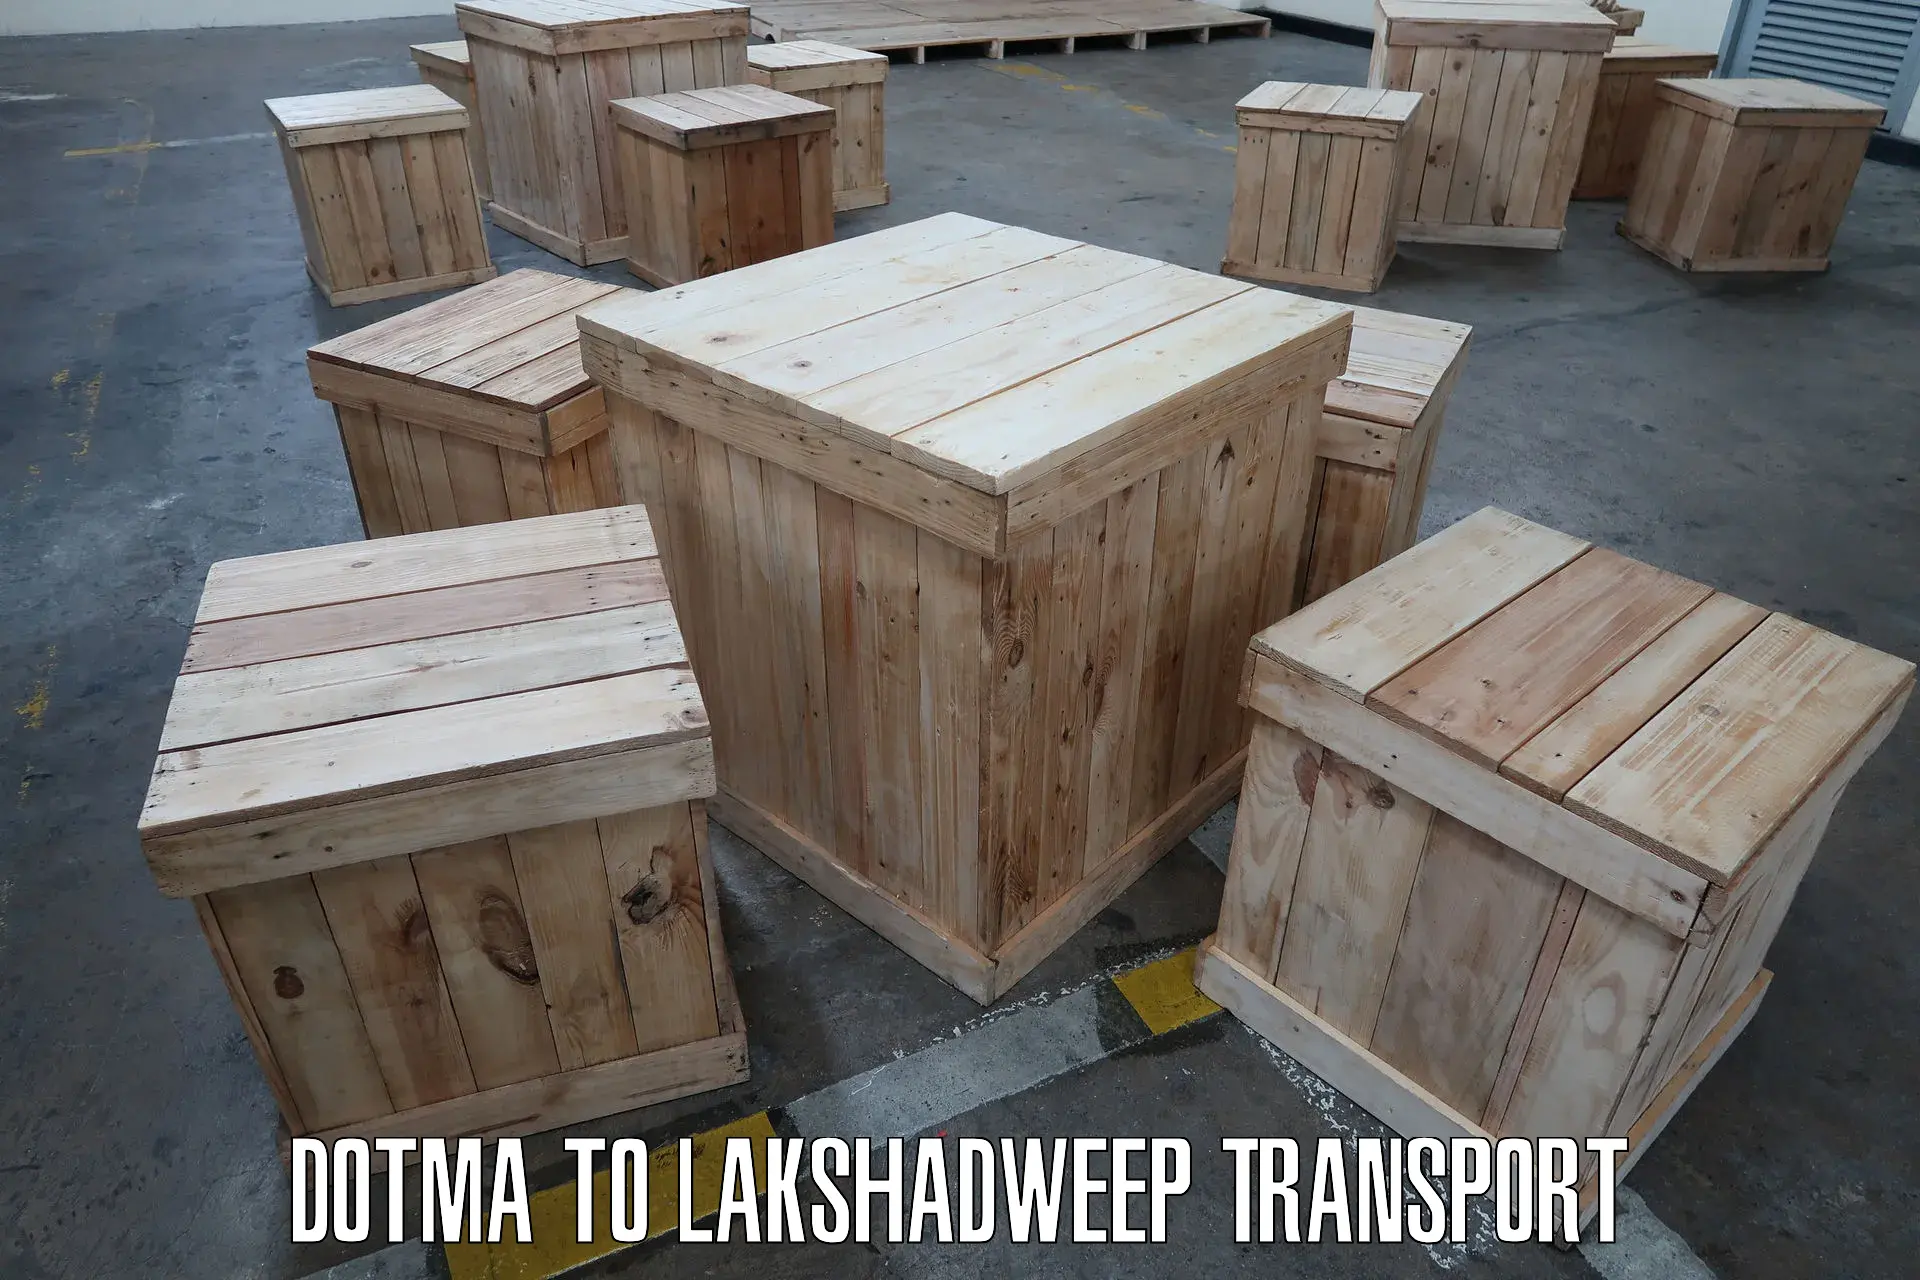 Container transport service Dotma to Lakshadweep